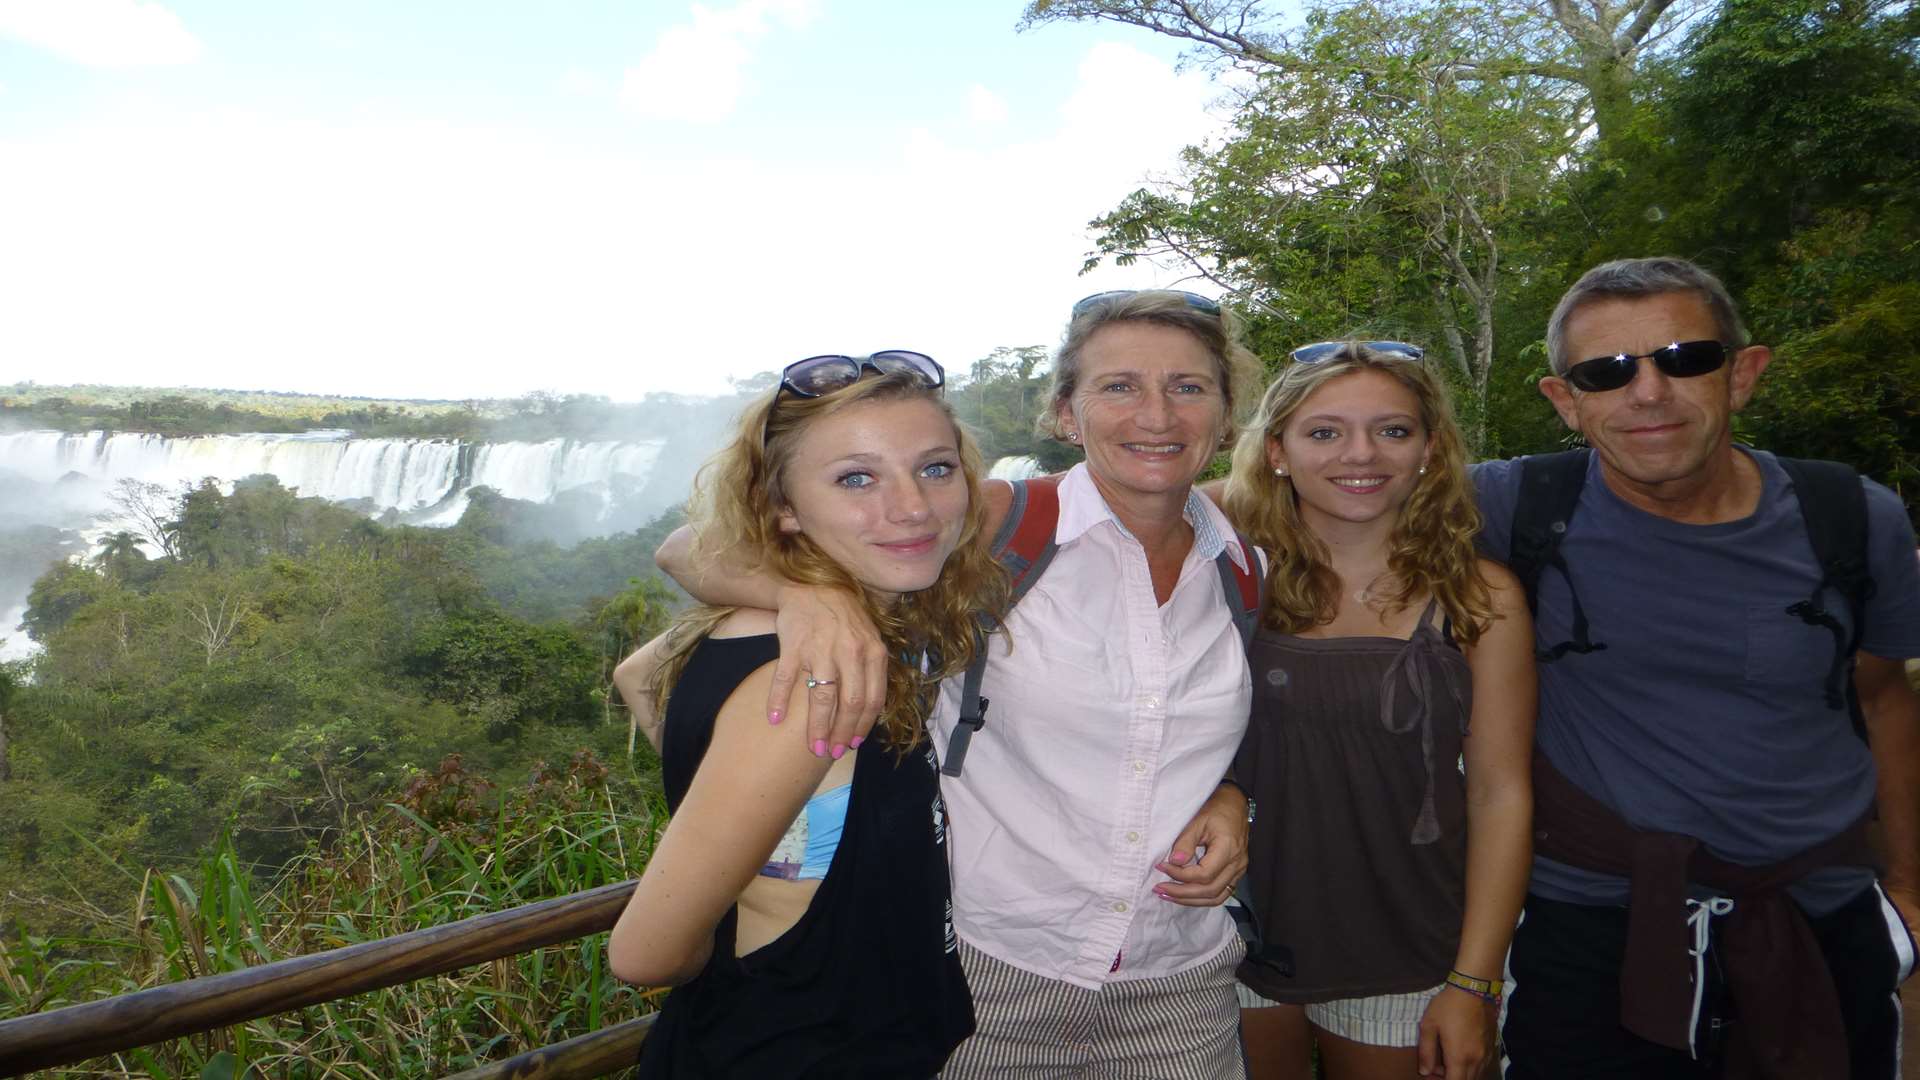 Gillian Metcalf, with daughters Natasha, Alice and husband Charlie by the Iguazu falls on their holiday in Brazil